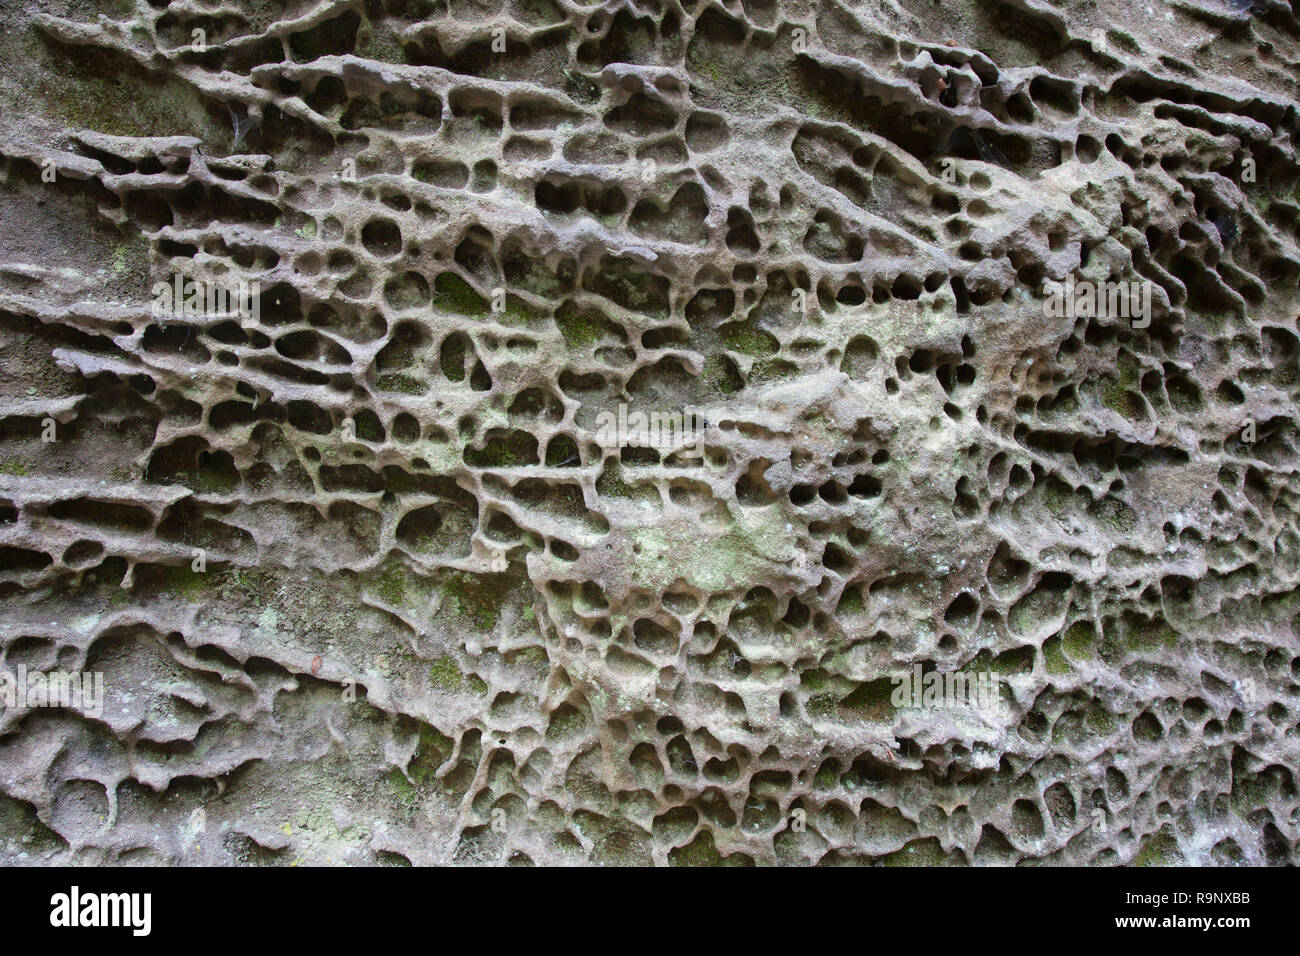 Close-up of eroded rock face in cliff due to wind and water erosion called honeycomb weathering / honeycombs / honeycombed sandstone, Saxony, Germany Stock Photo